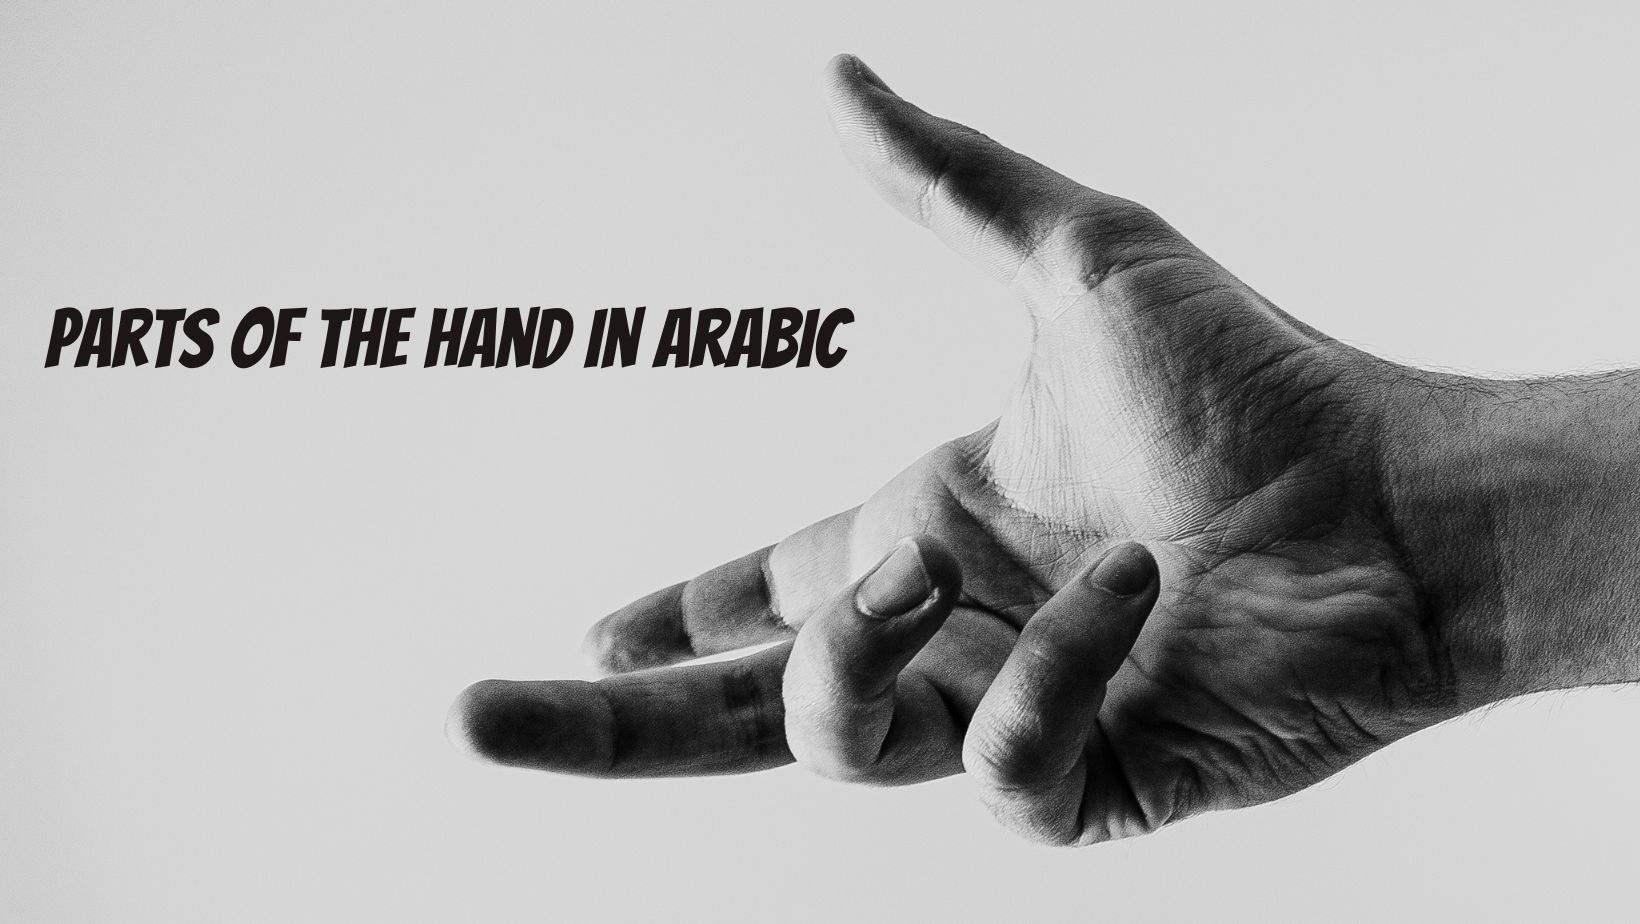 Parts of the hand in Arabic